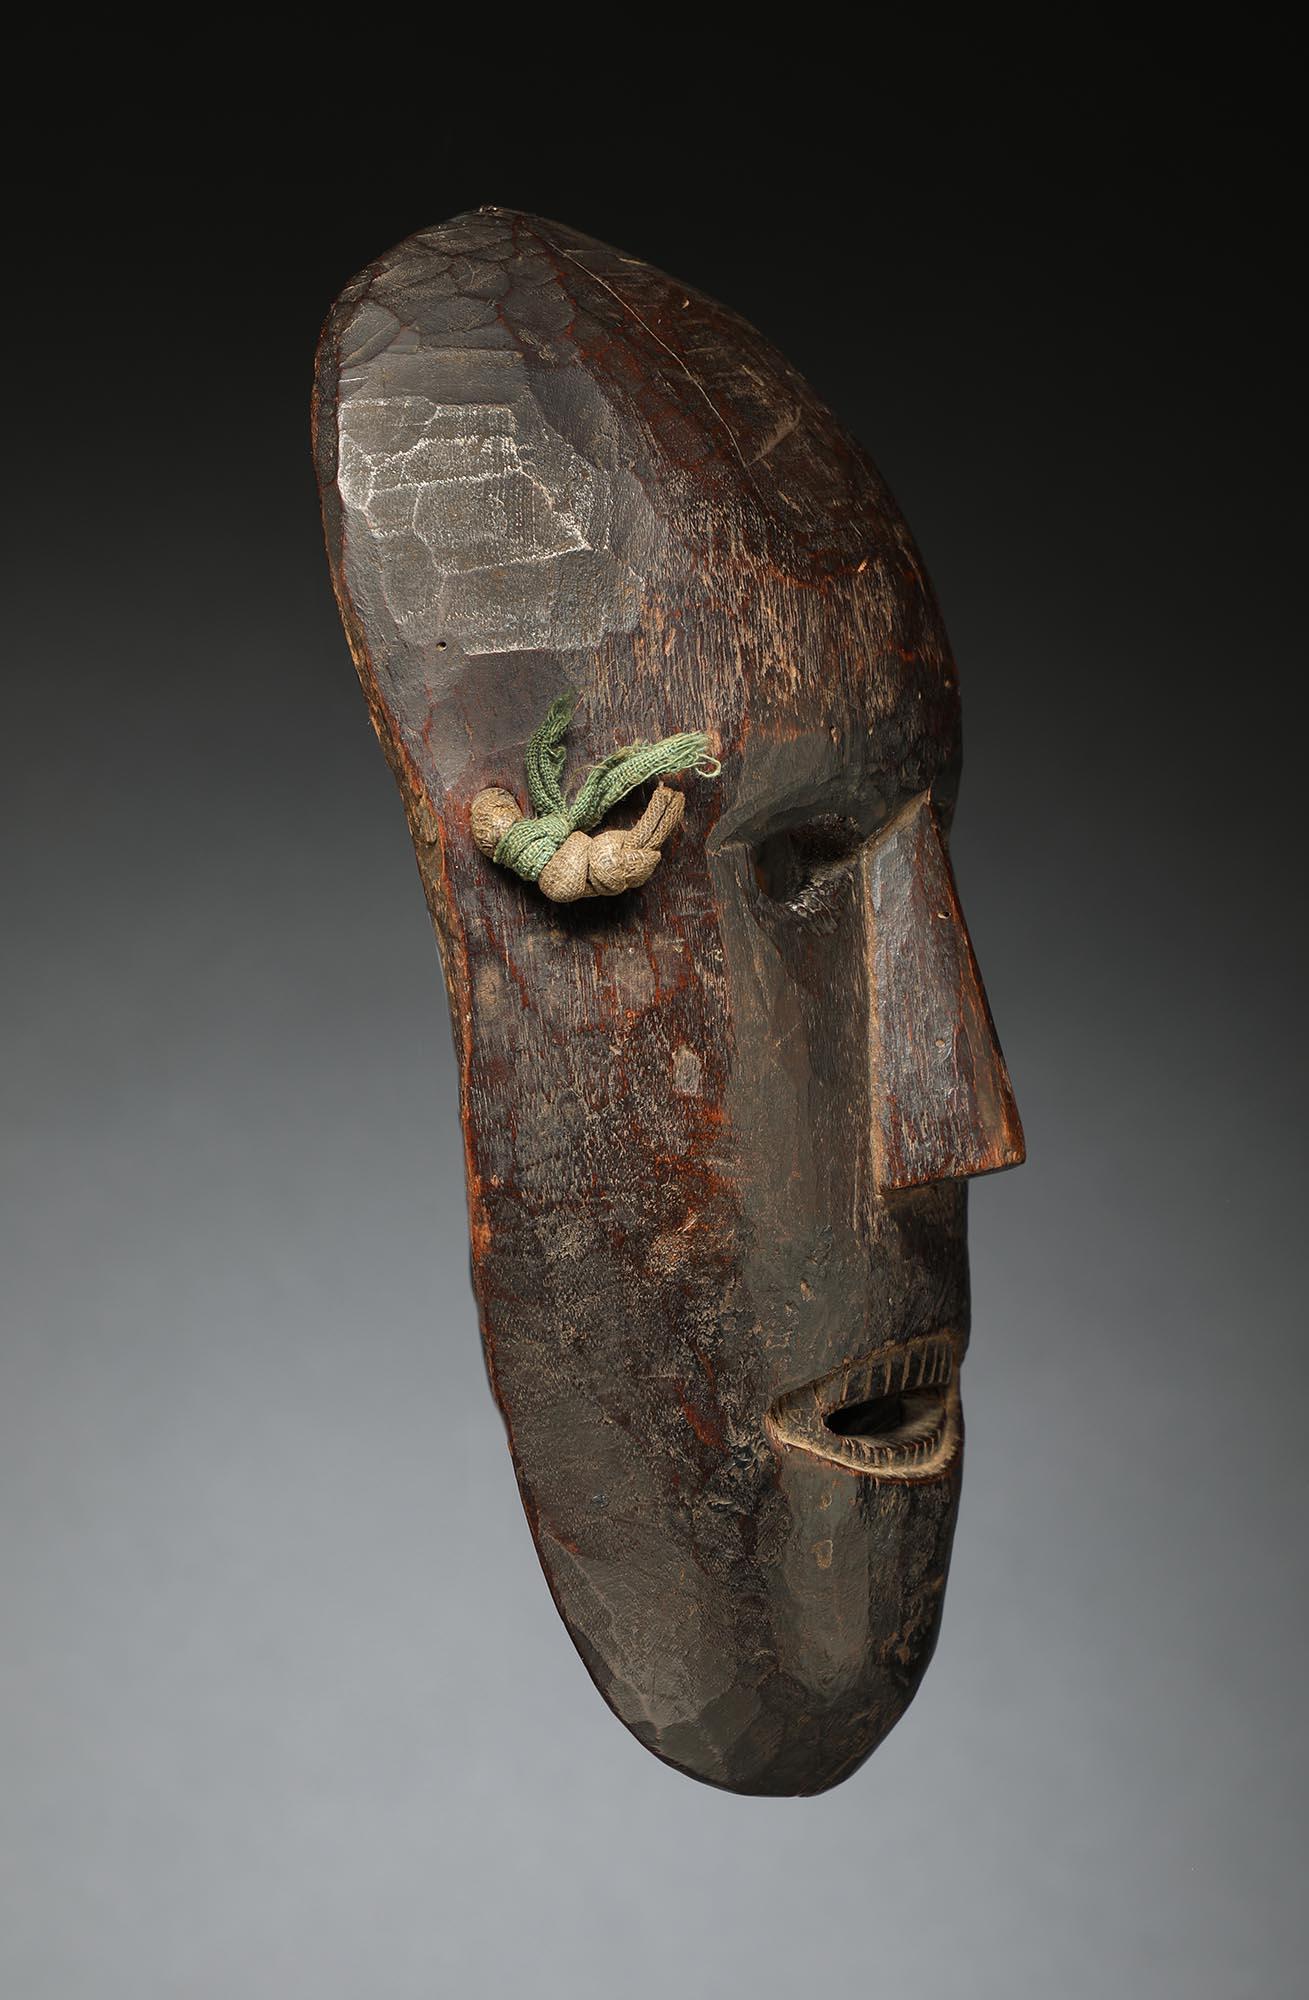 Oval dance Magar mask from Nepal with strong expression, open eyes and mouth with finely carved teeth. Heavy worn patina inside and out from traditional use. Ex- private collection in California, originally acquired from James Willis Tribal Art, San